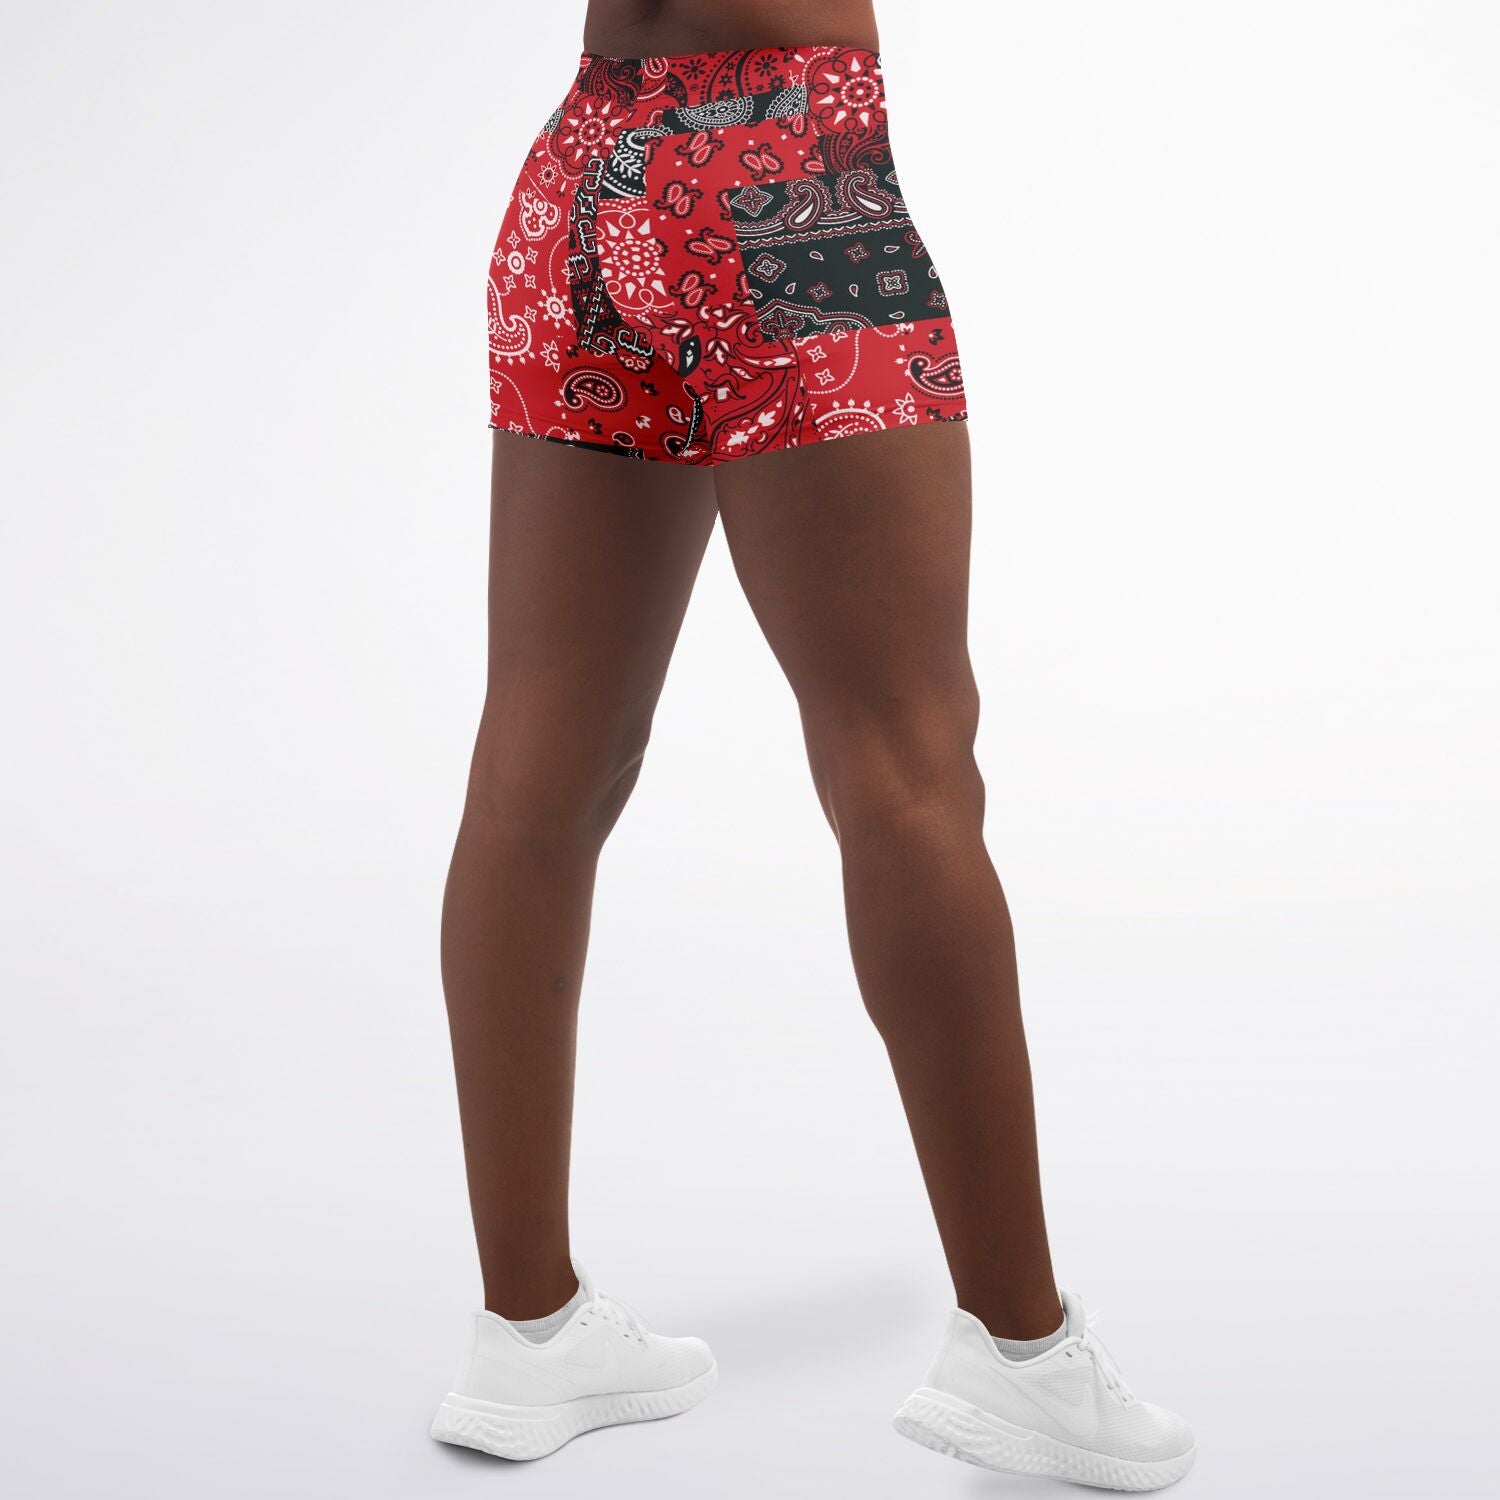 Women's Red Paisley Patchwork Mid-rise Athletic Yoga Booty Shorts Model Back